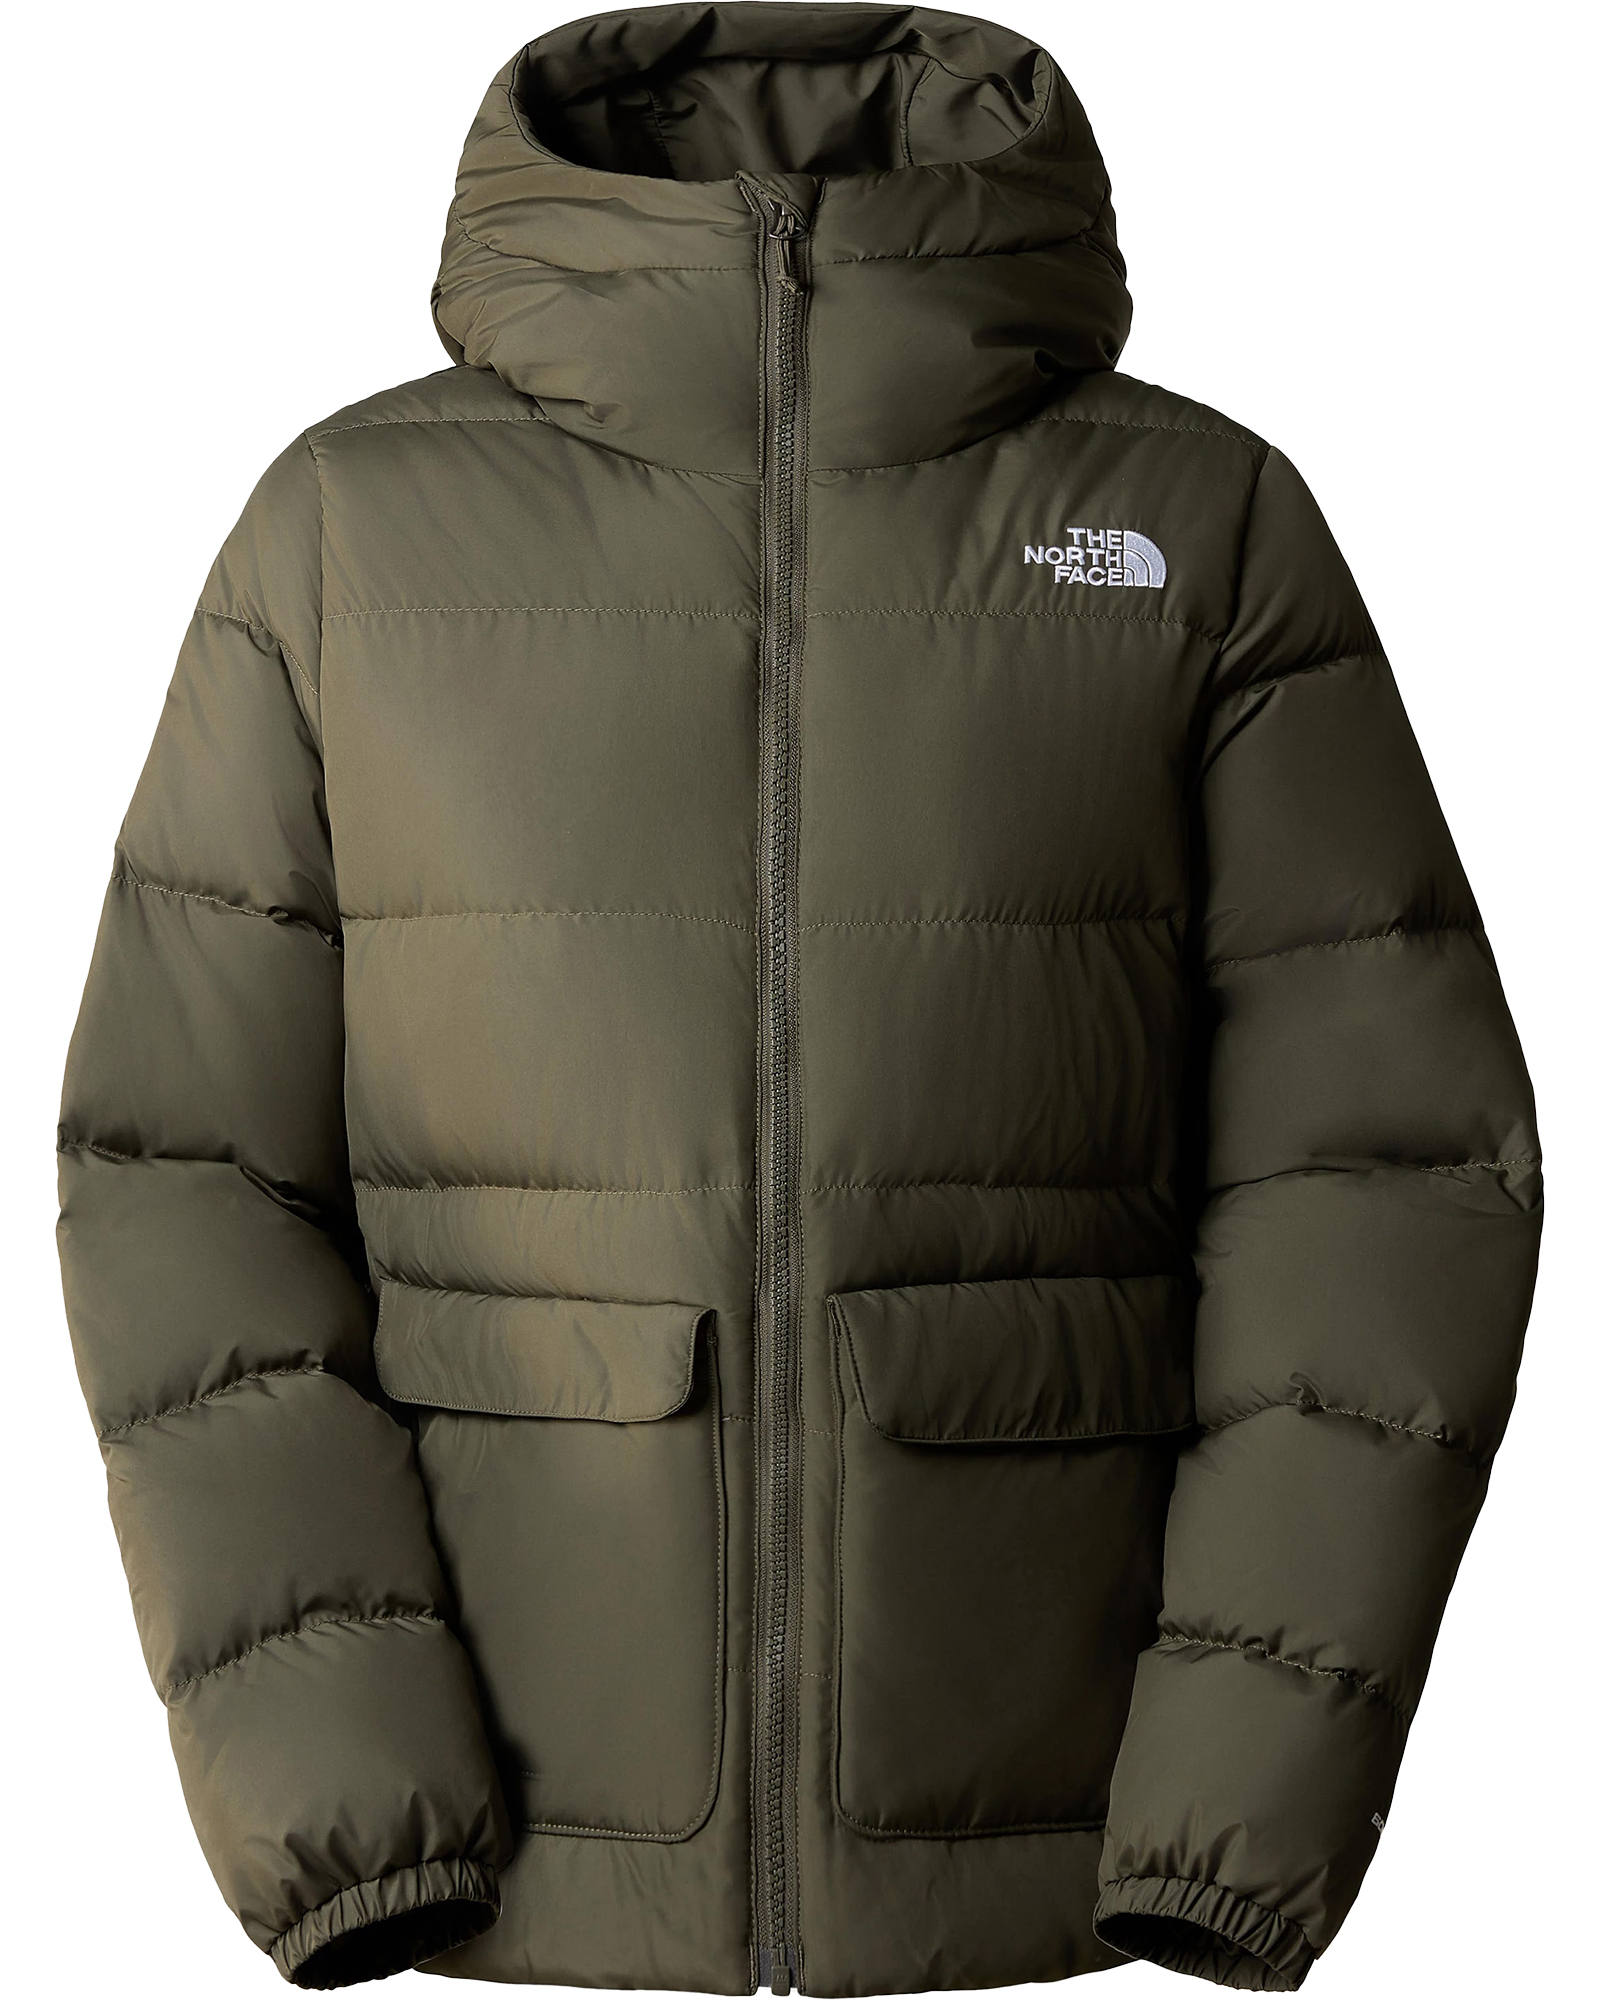 The North Face Women’s Gotham Down Jacket - New Taupe Green S